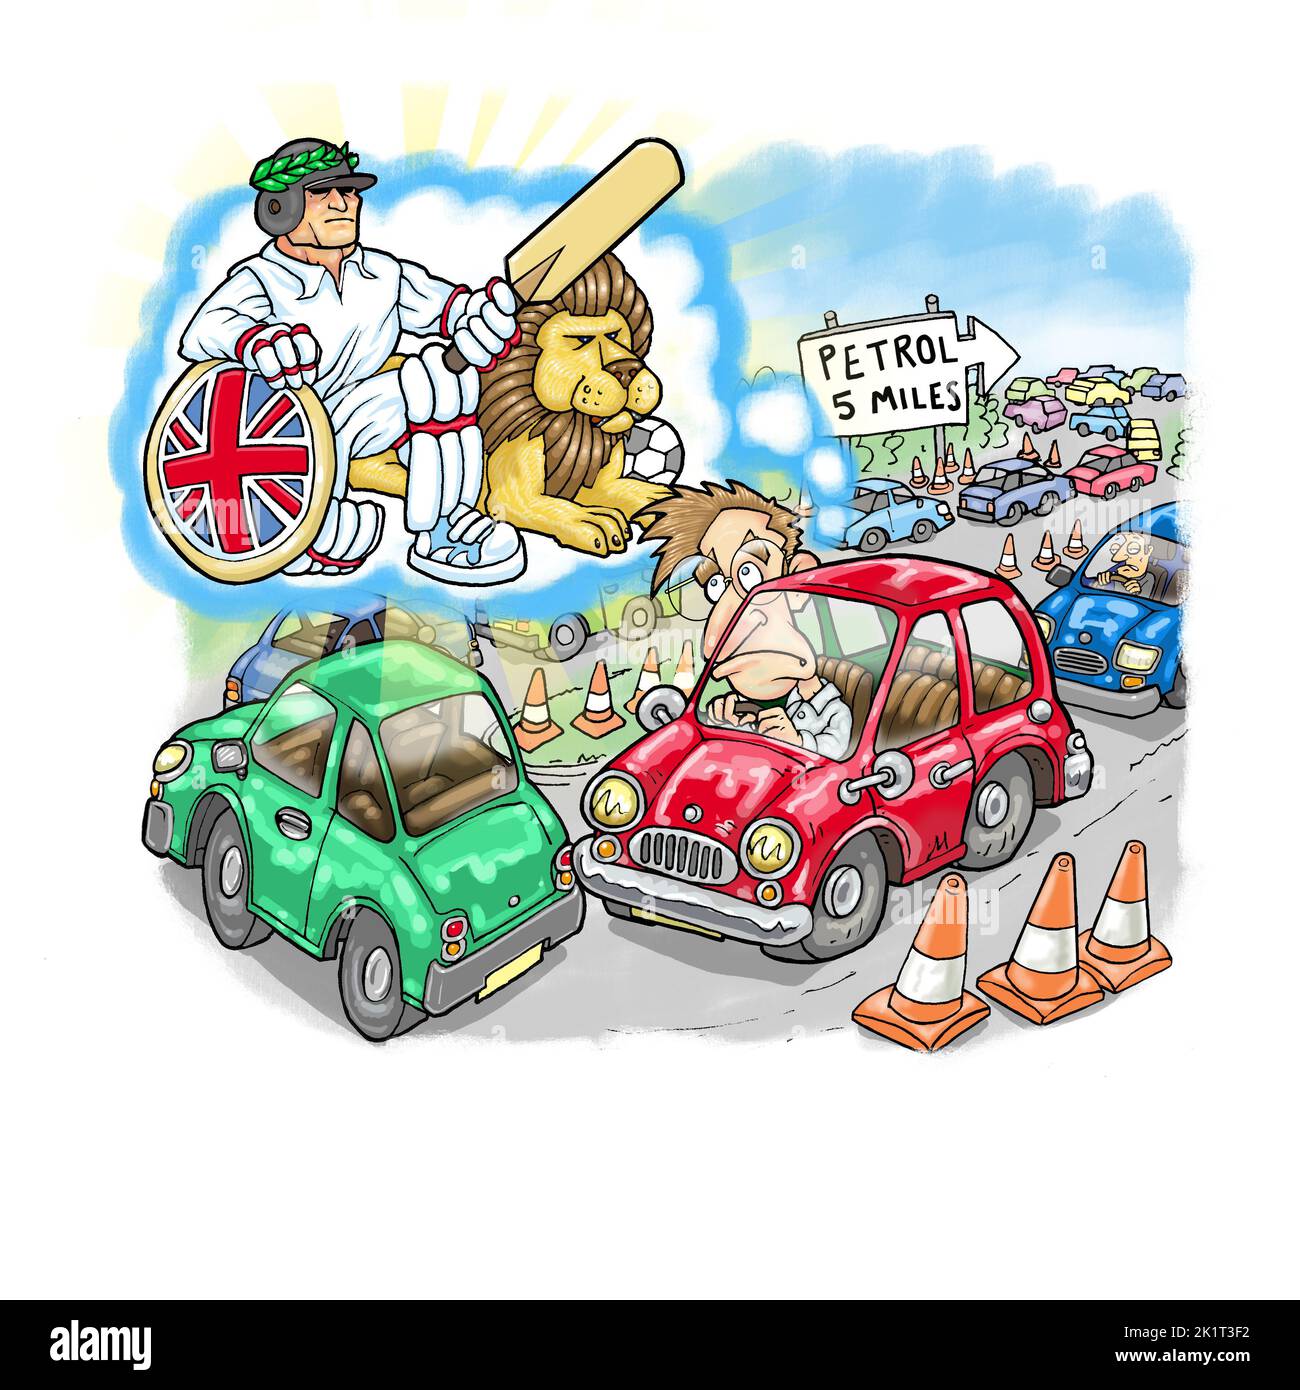 Cartoon art, man stuck in traffic jam/customs queue dreaming of English stereotypes of cricket, Britannia, and lions verses the post Brexit realities Stock Photo